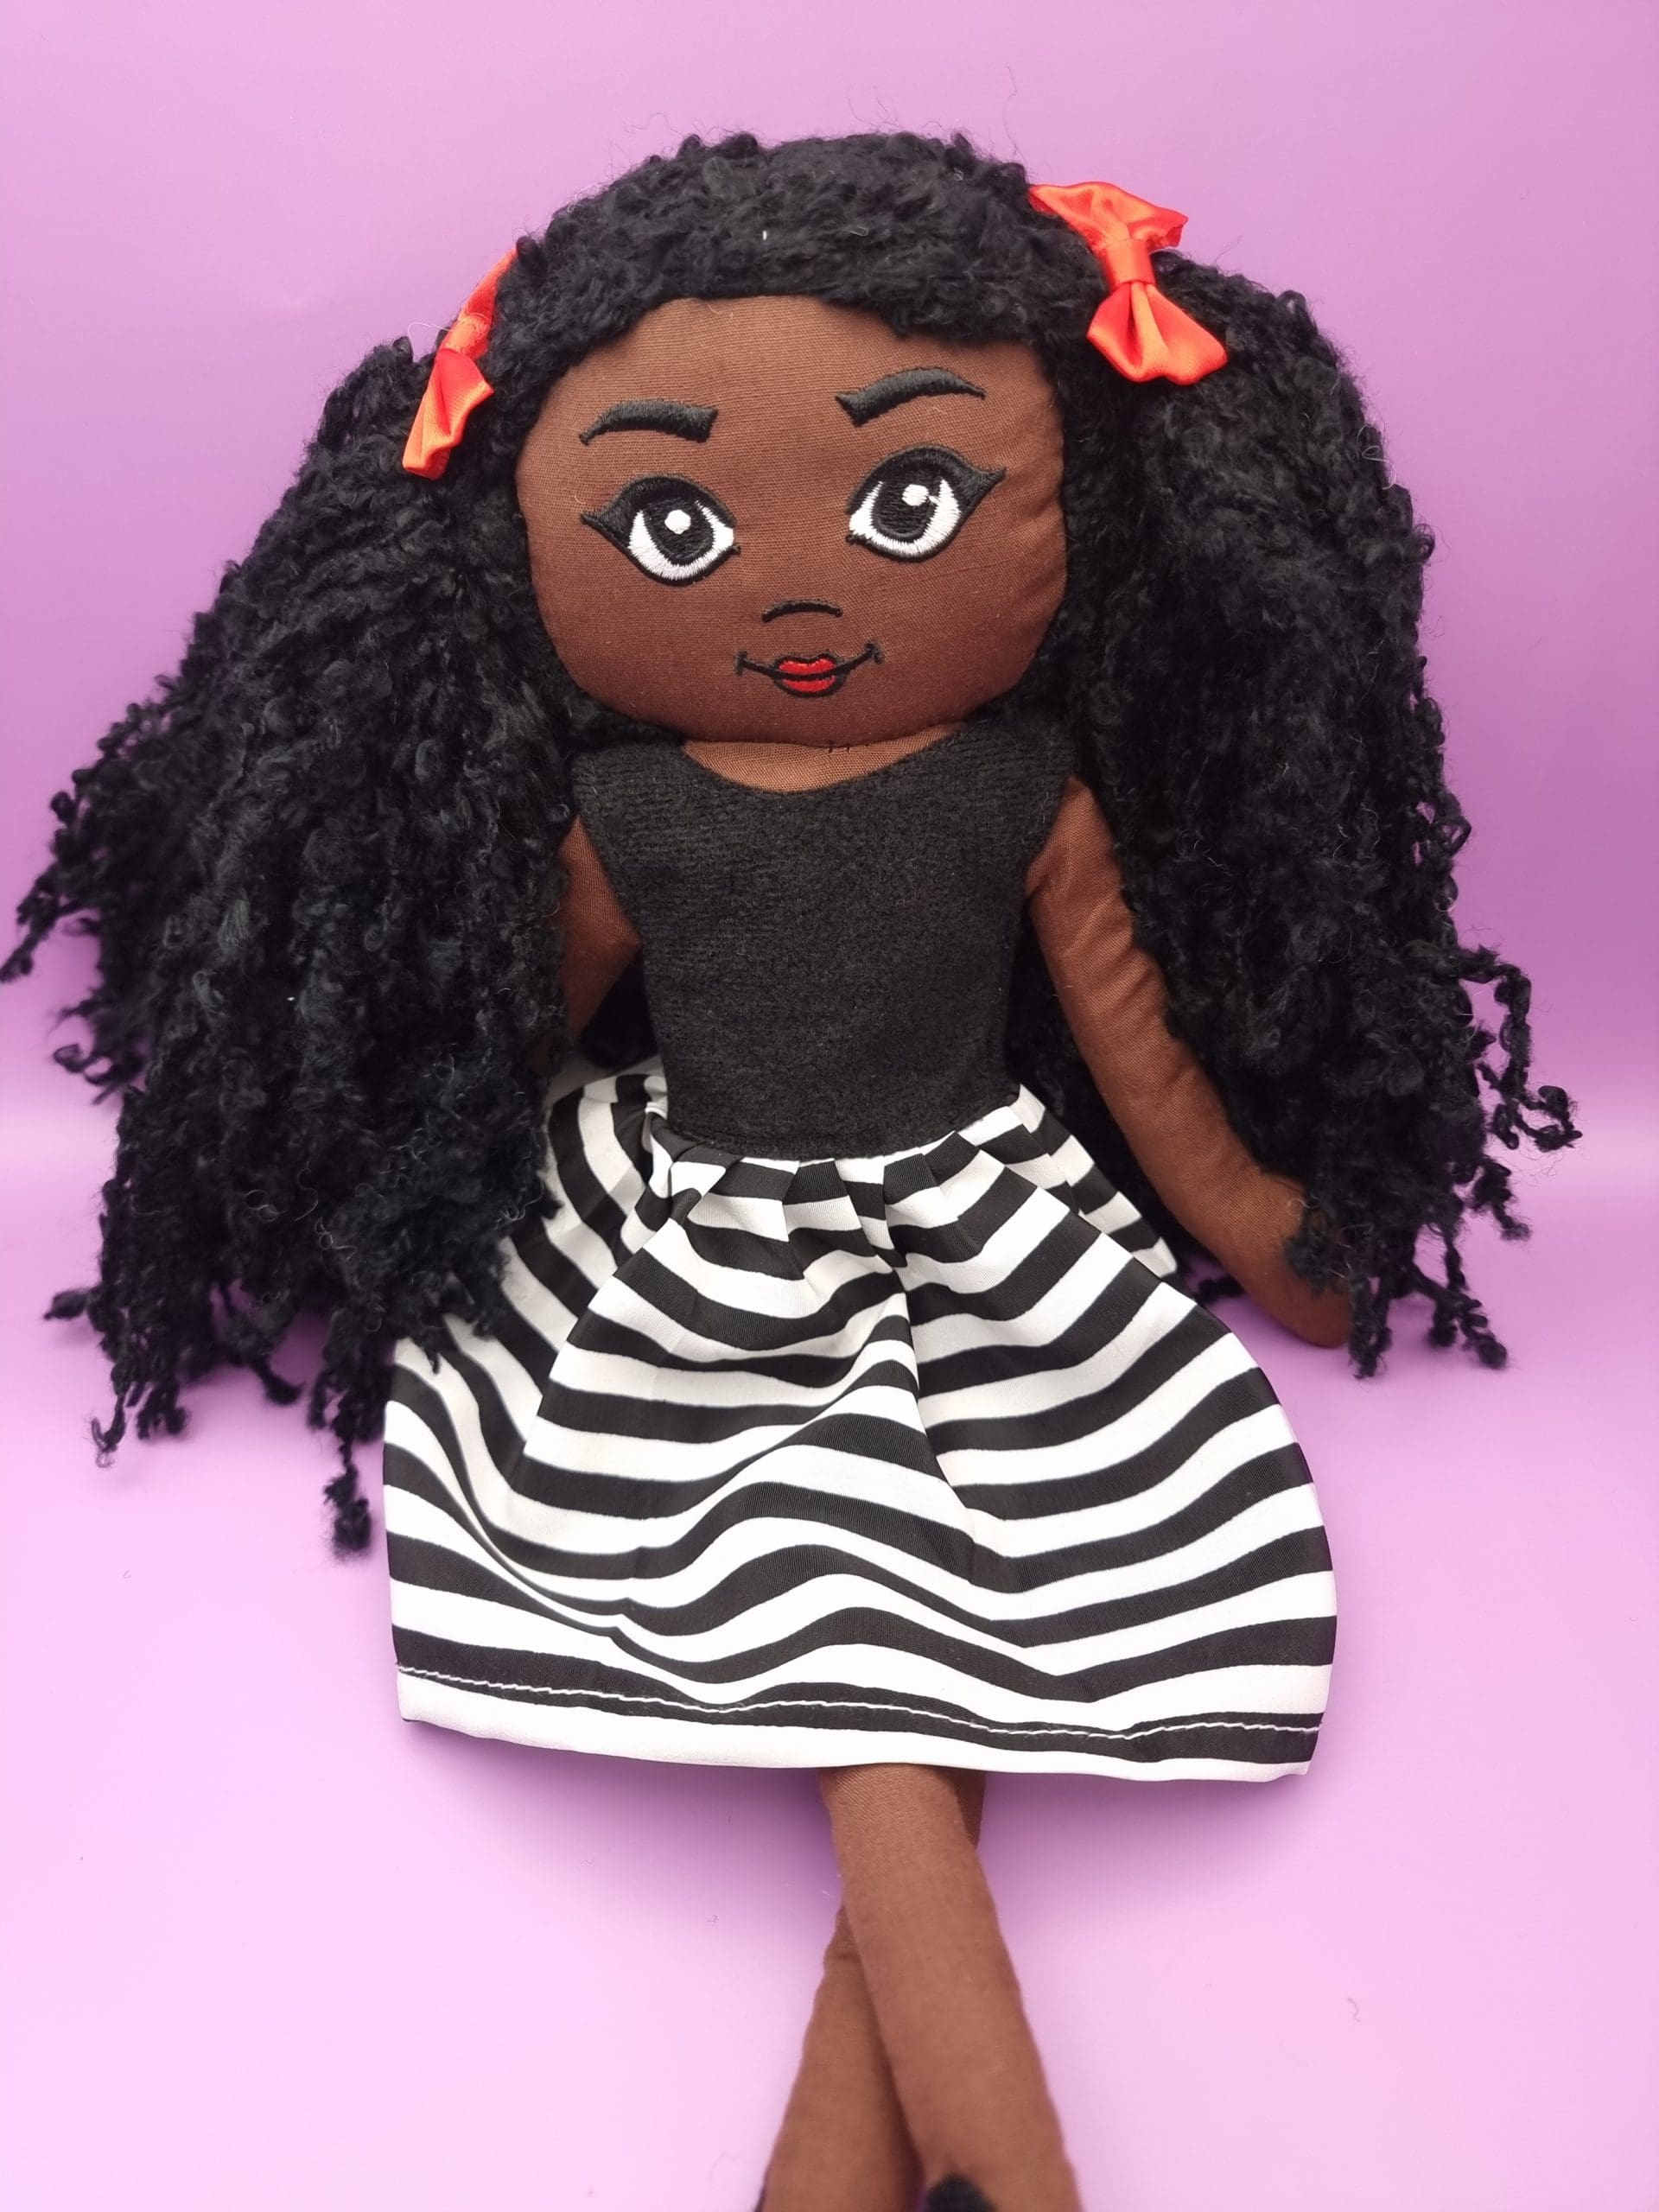 Amaris Handmade black girl fabric doll wearing a black dress with a black and white skirt